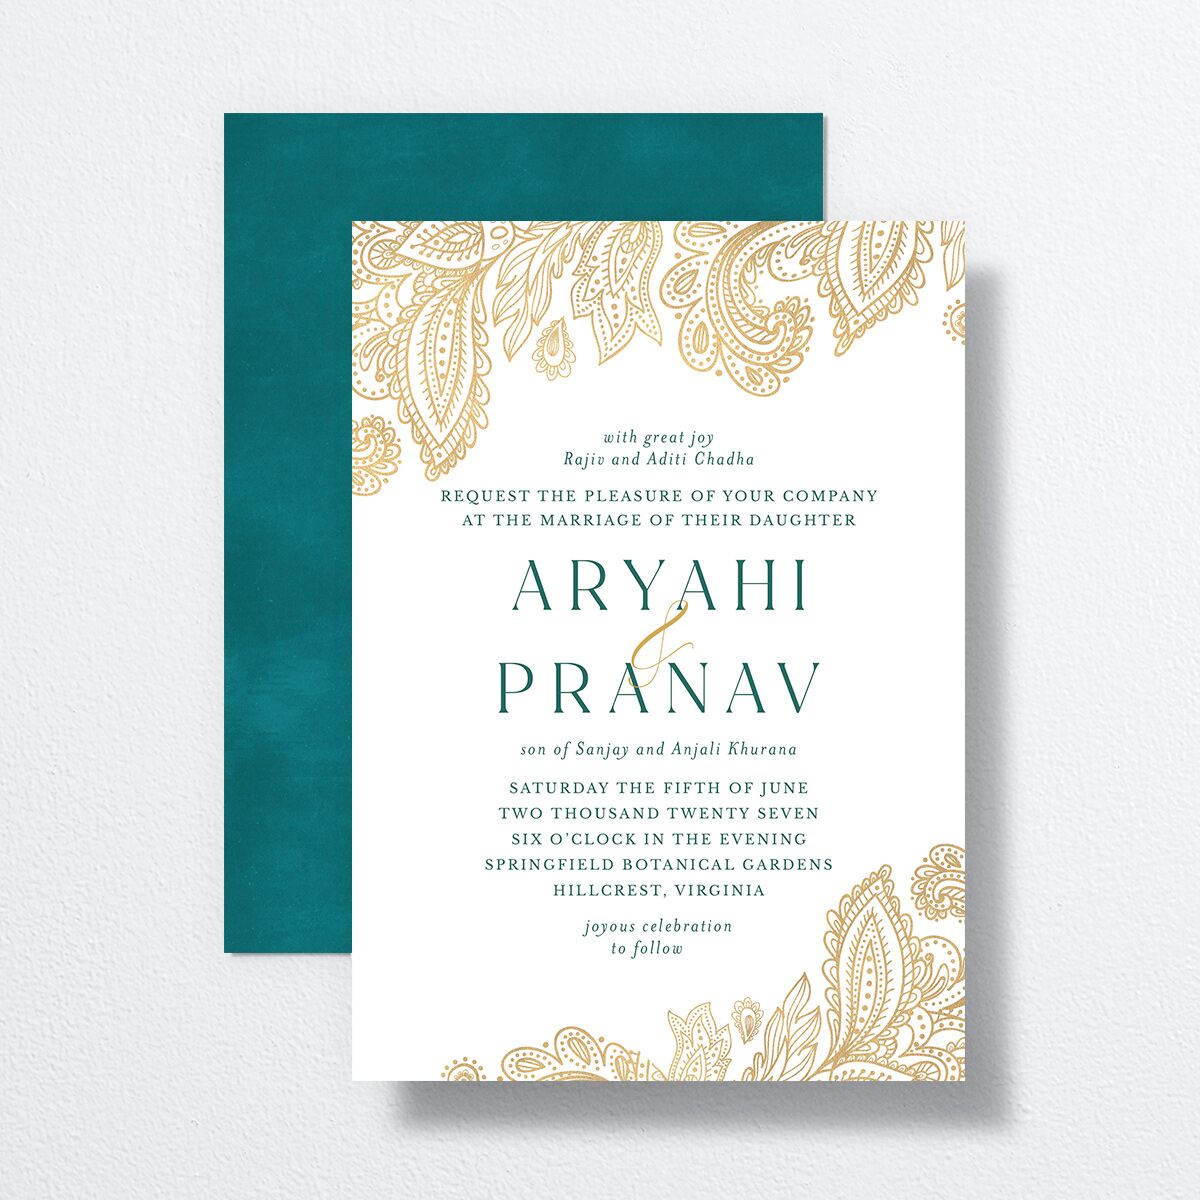 Ornate Deco Wedding Invitations front-and-back in Pure White